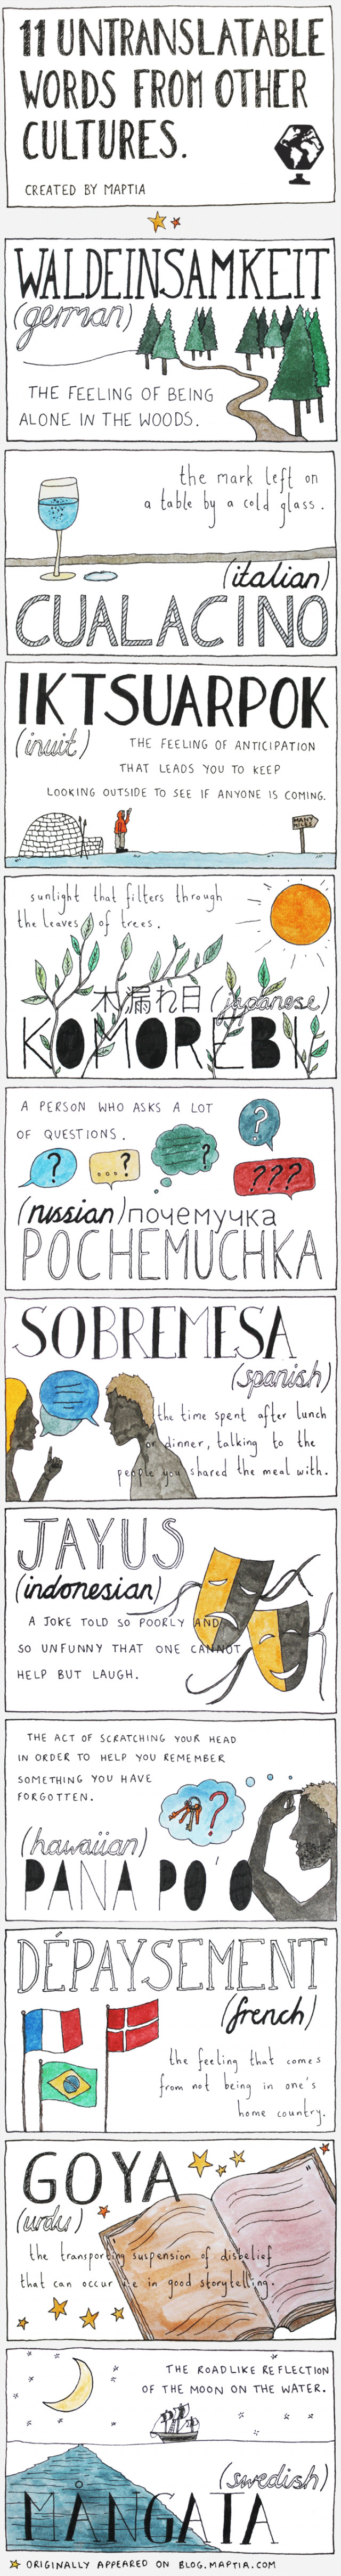 11-untranslatable-words-from-other-cultures_52152bbe65e85-640x4841